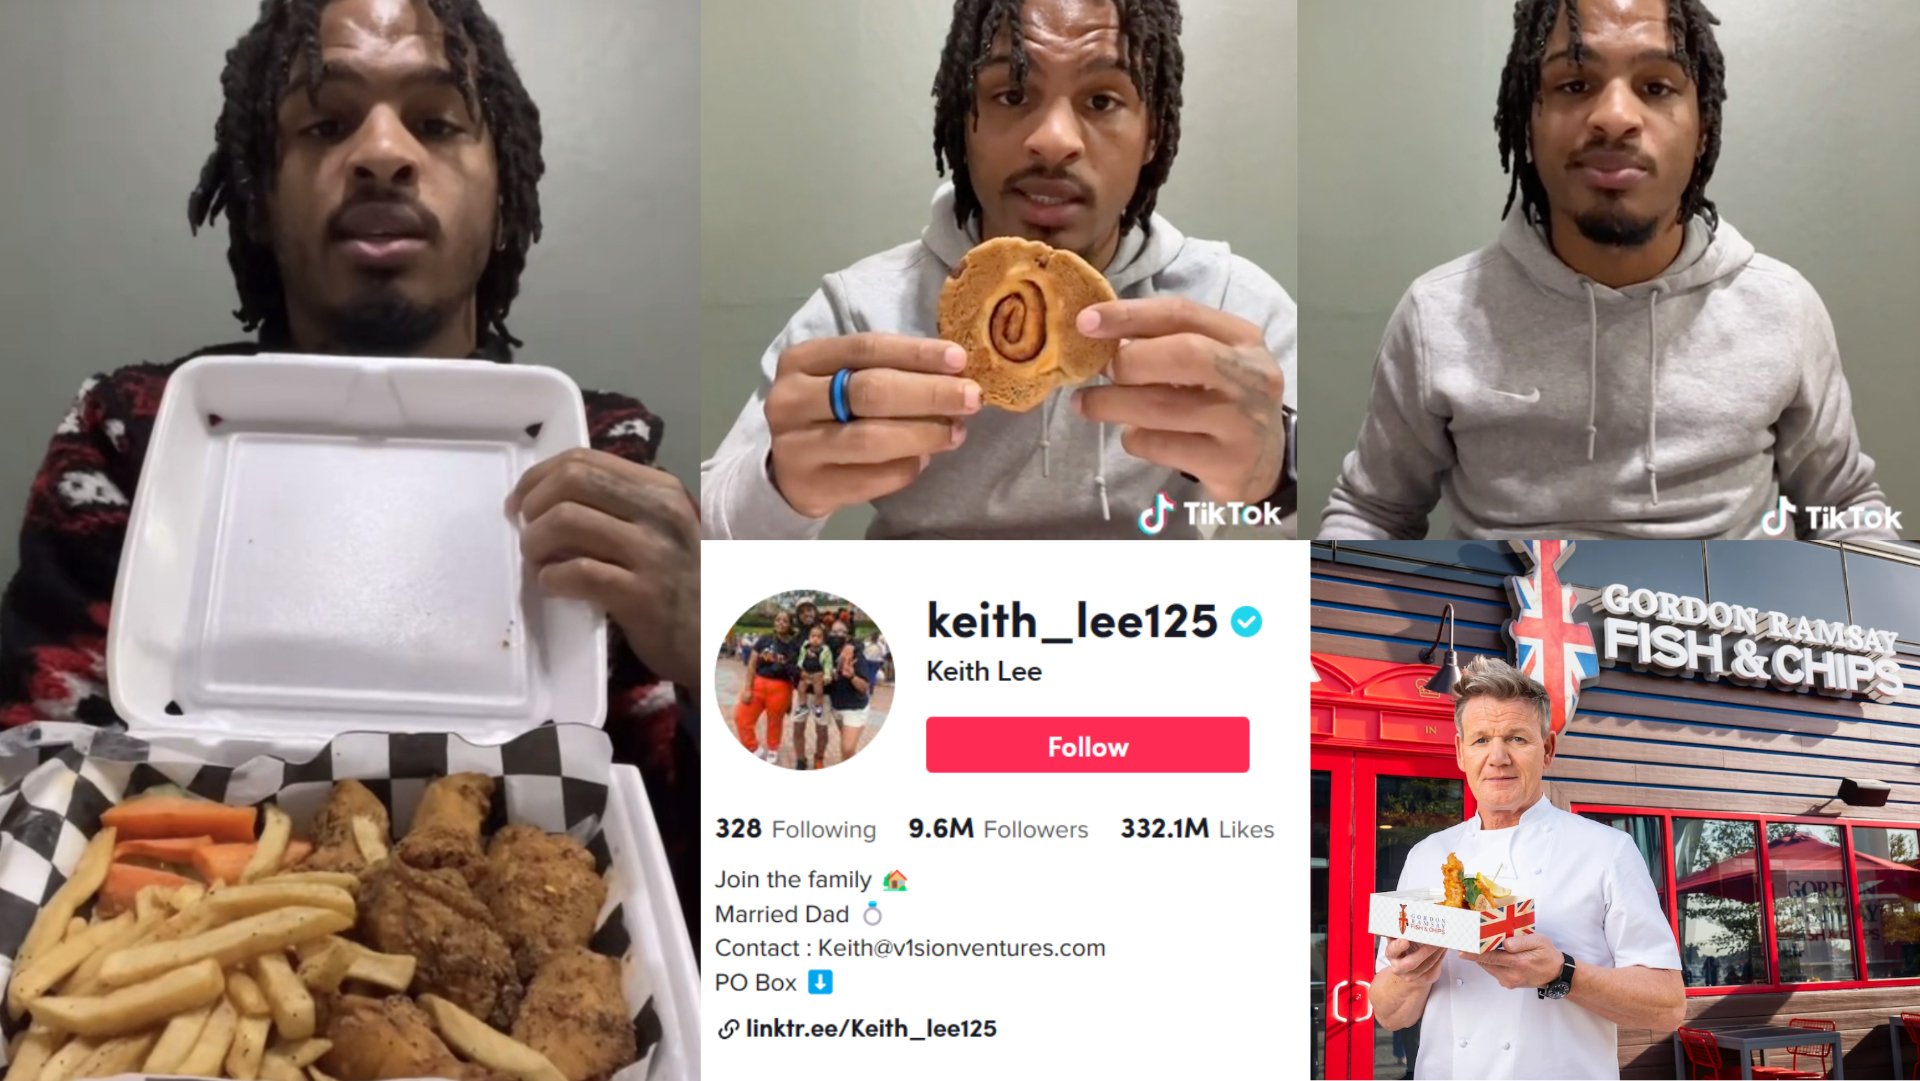 TikTok: All Keith Lee's food review videos - Ranked